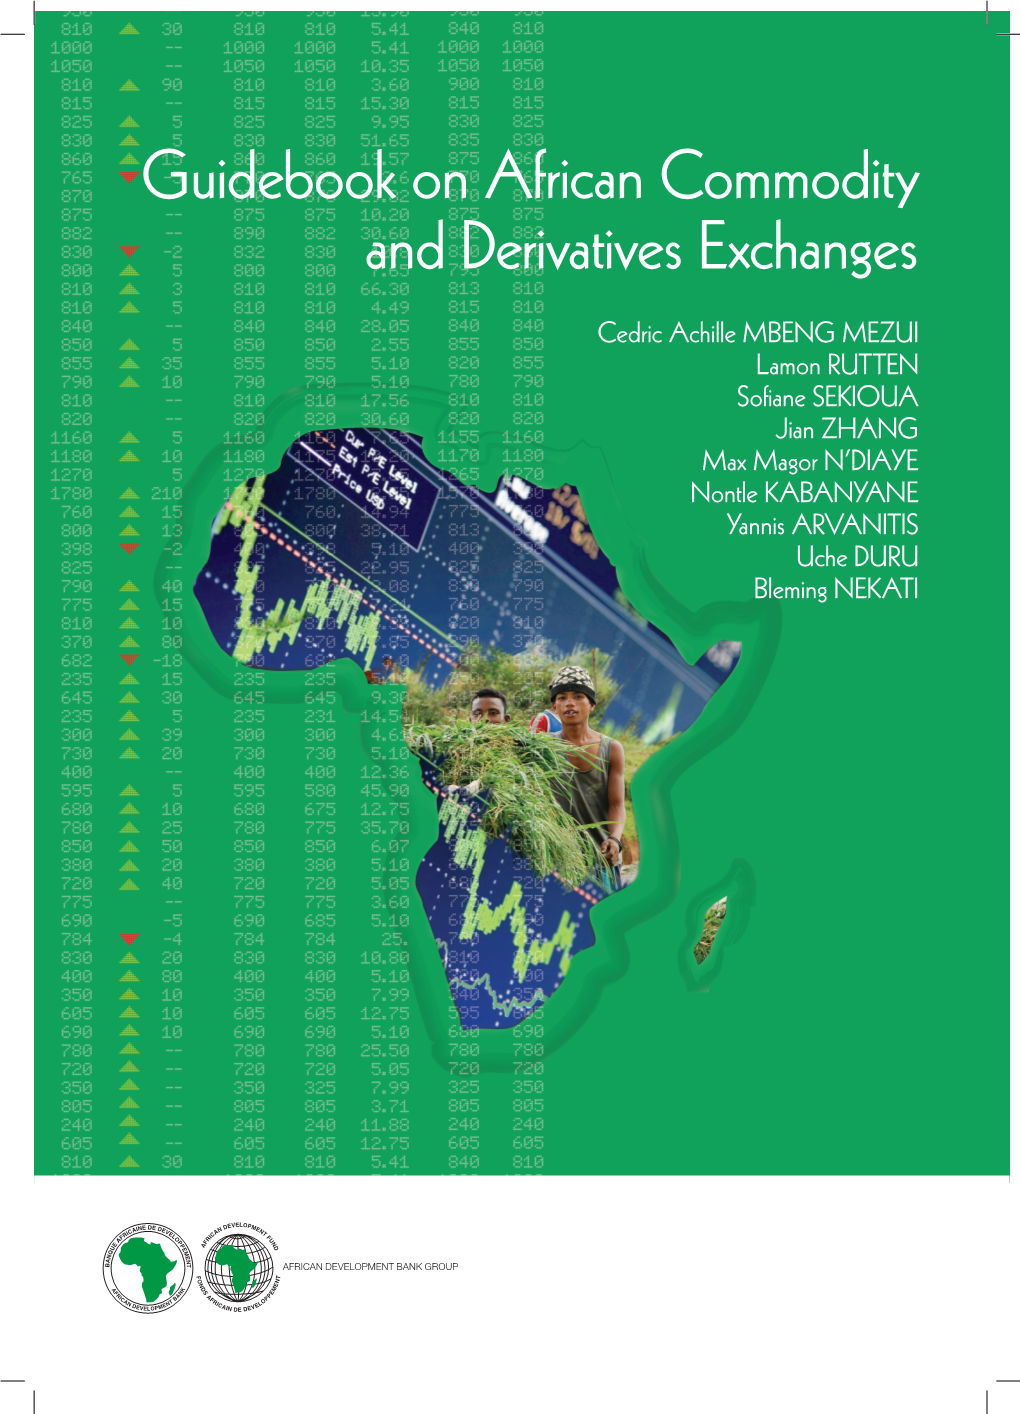 Guidebook on African Commodity and Derivatives Exchanges